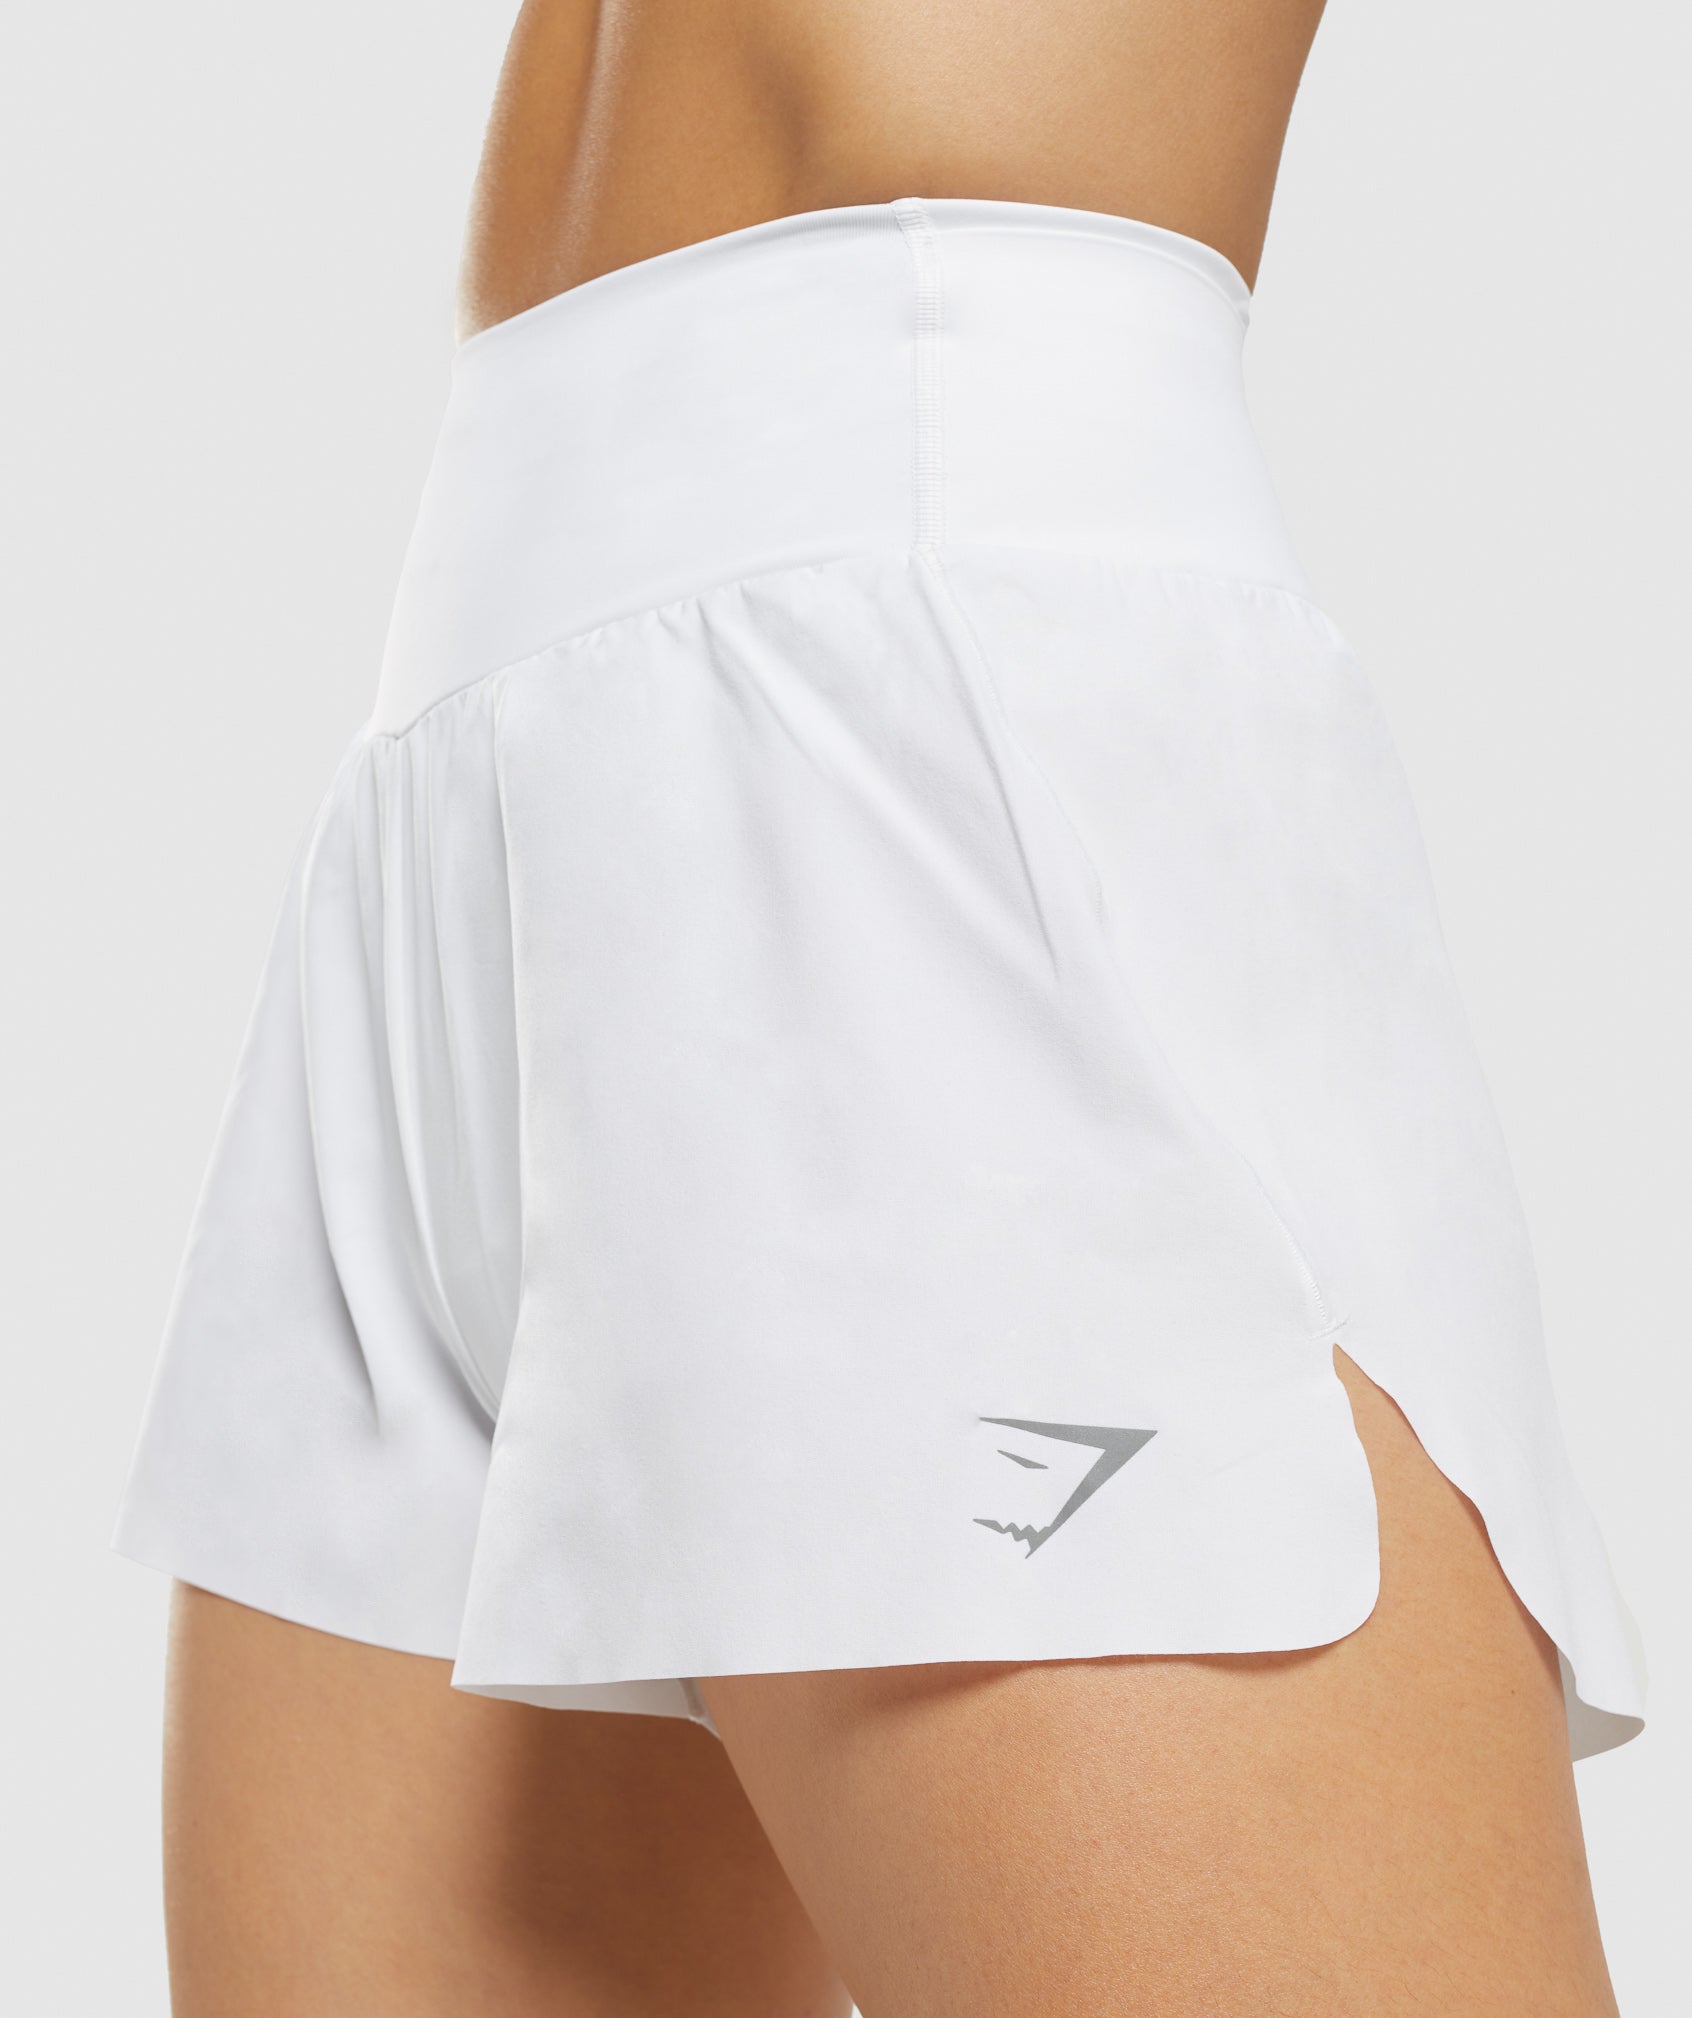 Speed Shorts in White - view 5